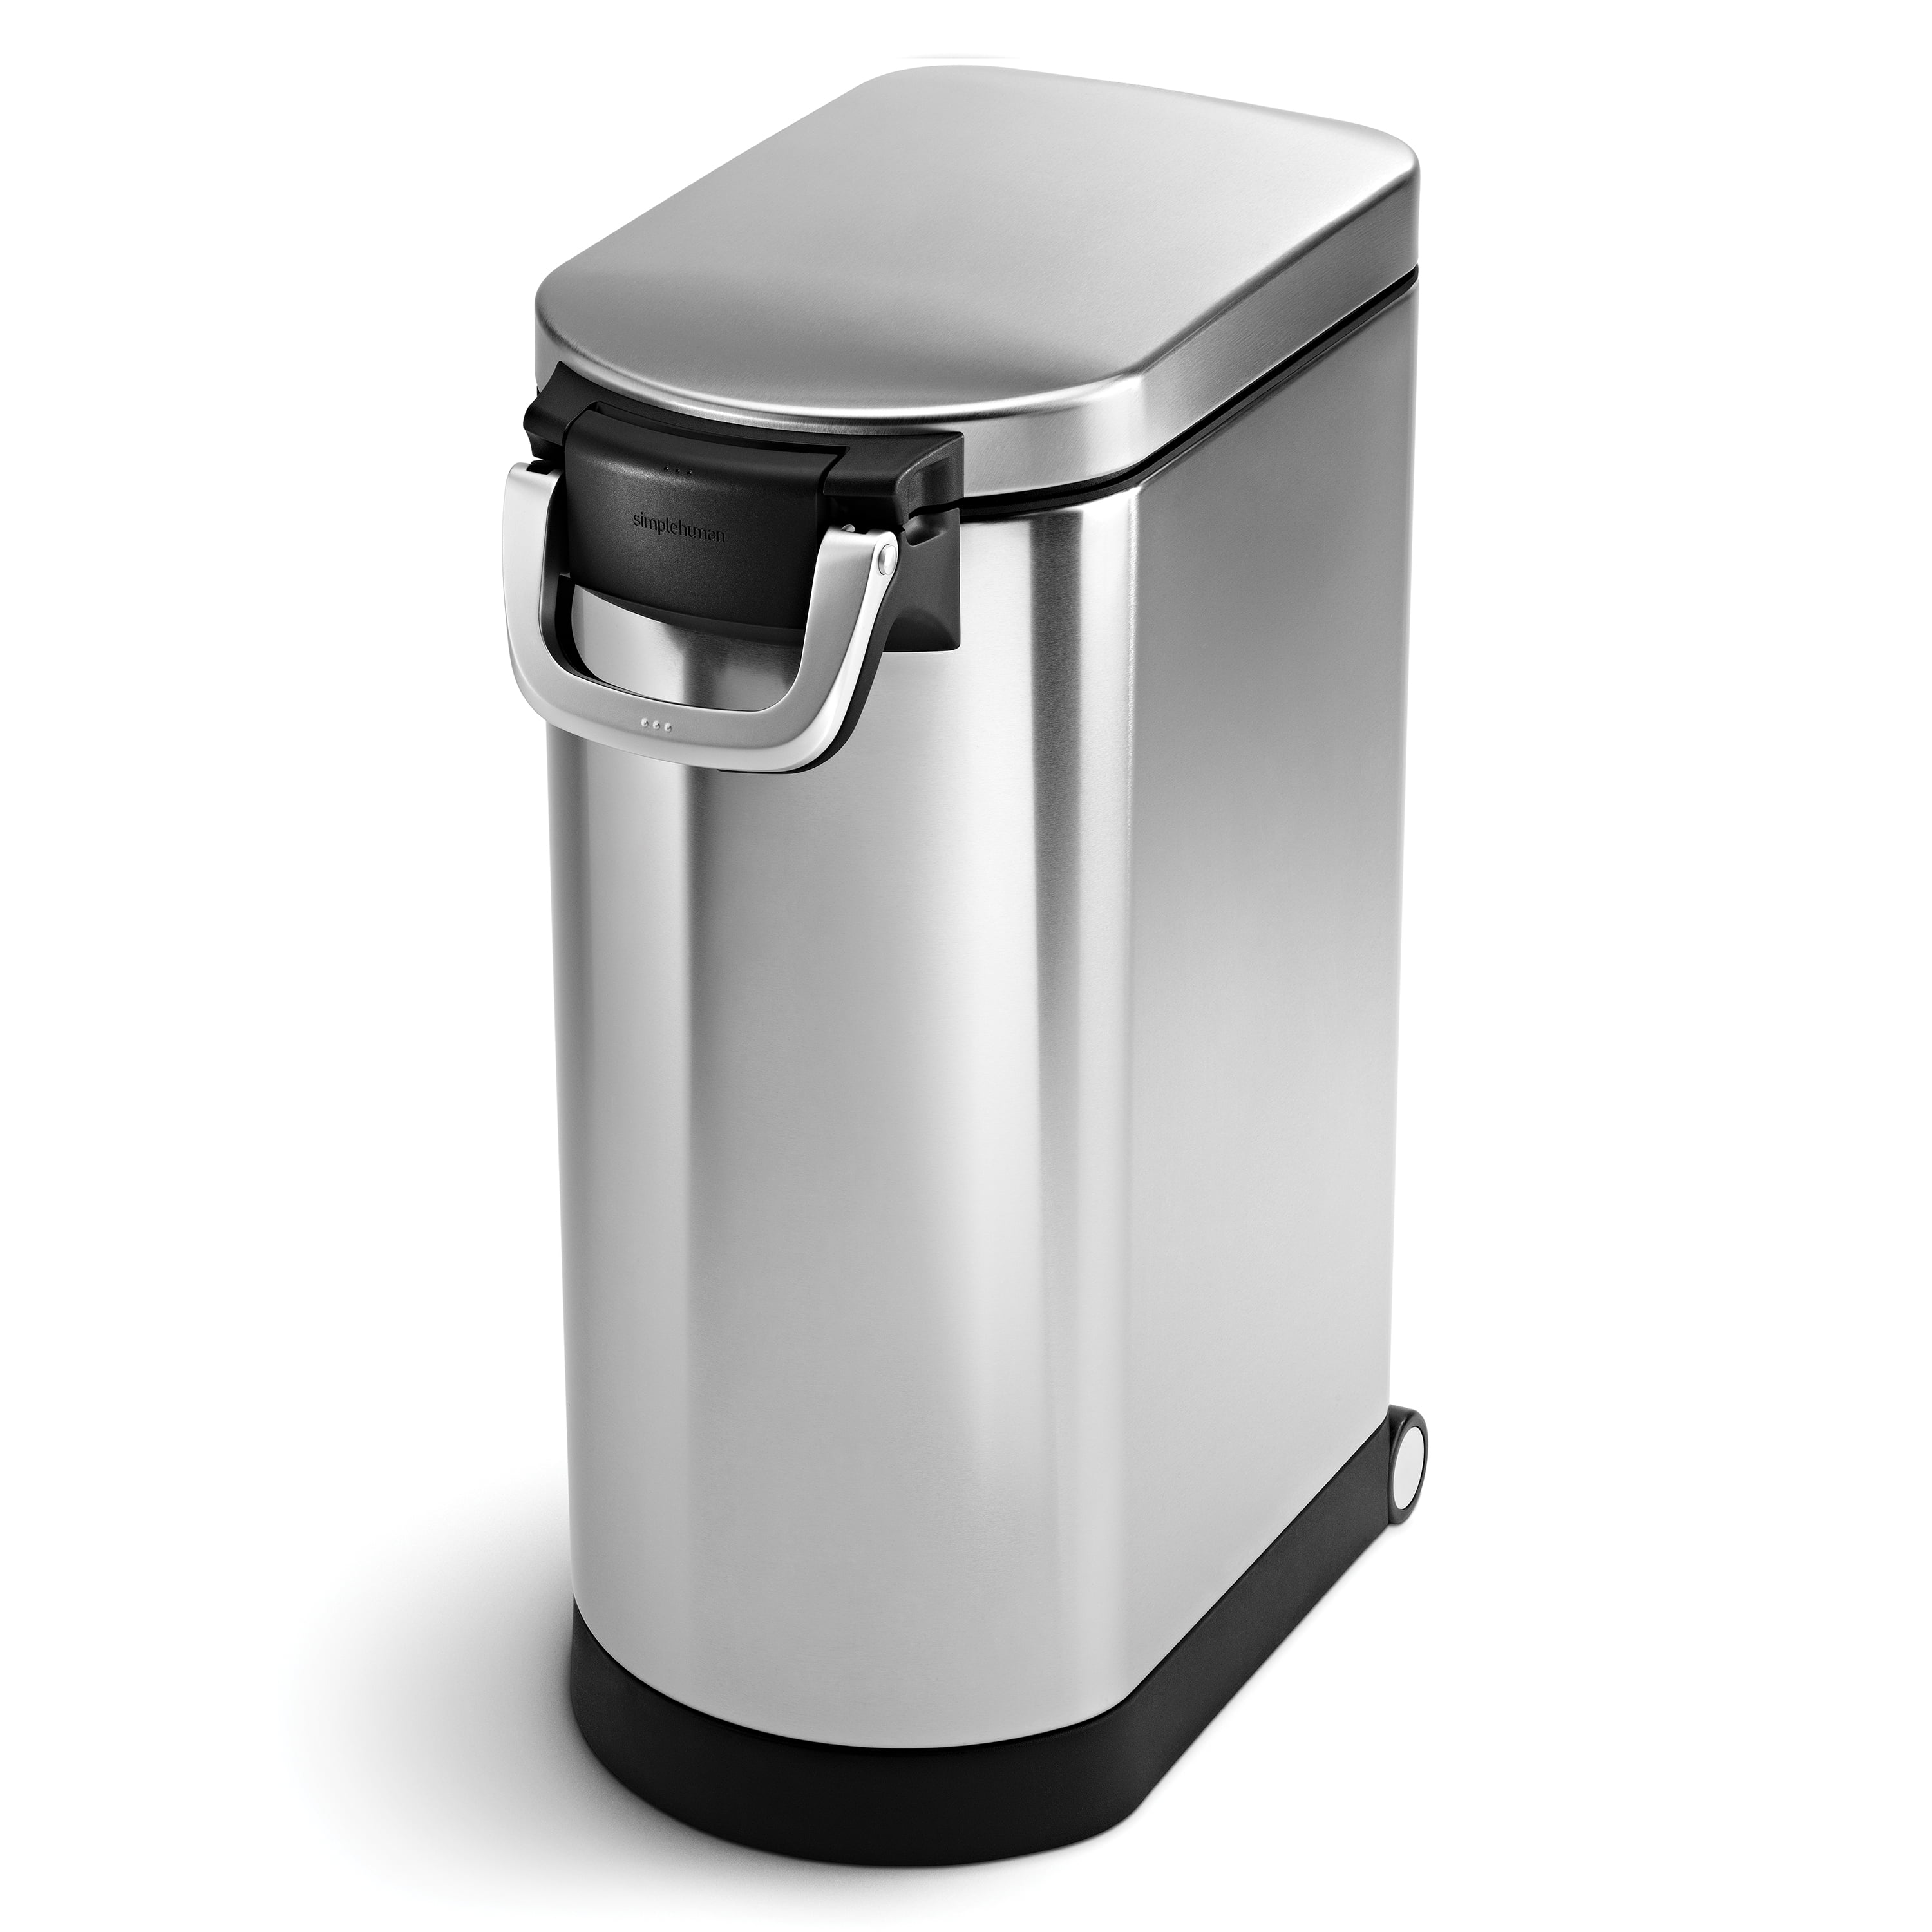 Photo 1 of (DENTED SIDES)
simplehuman 35 Liter, 40 lb / 18.1 kg Extra Large Pet Food Storage Container, Brushed Stainless Steel